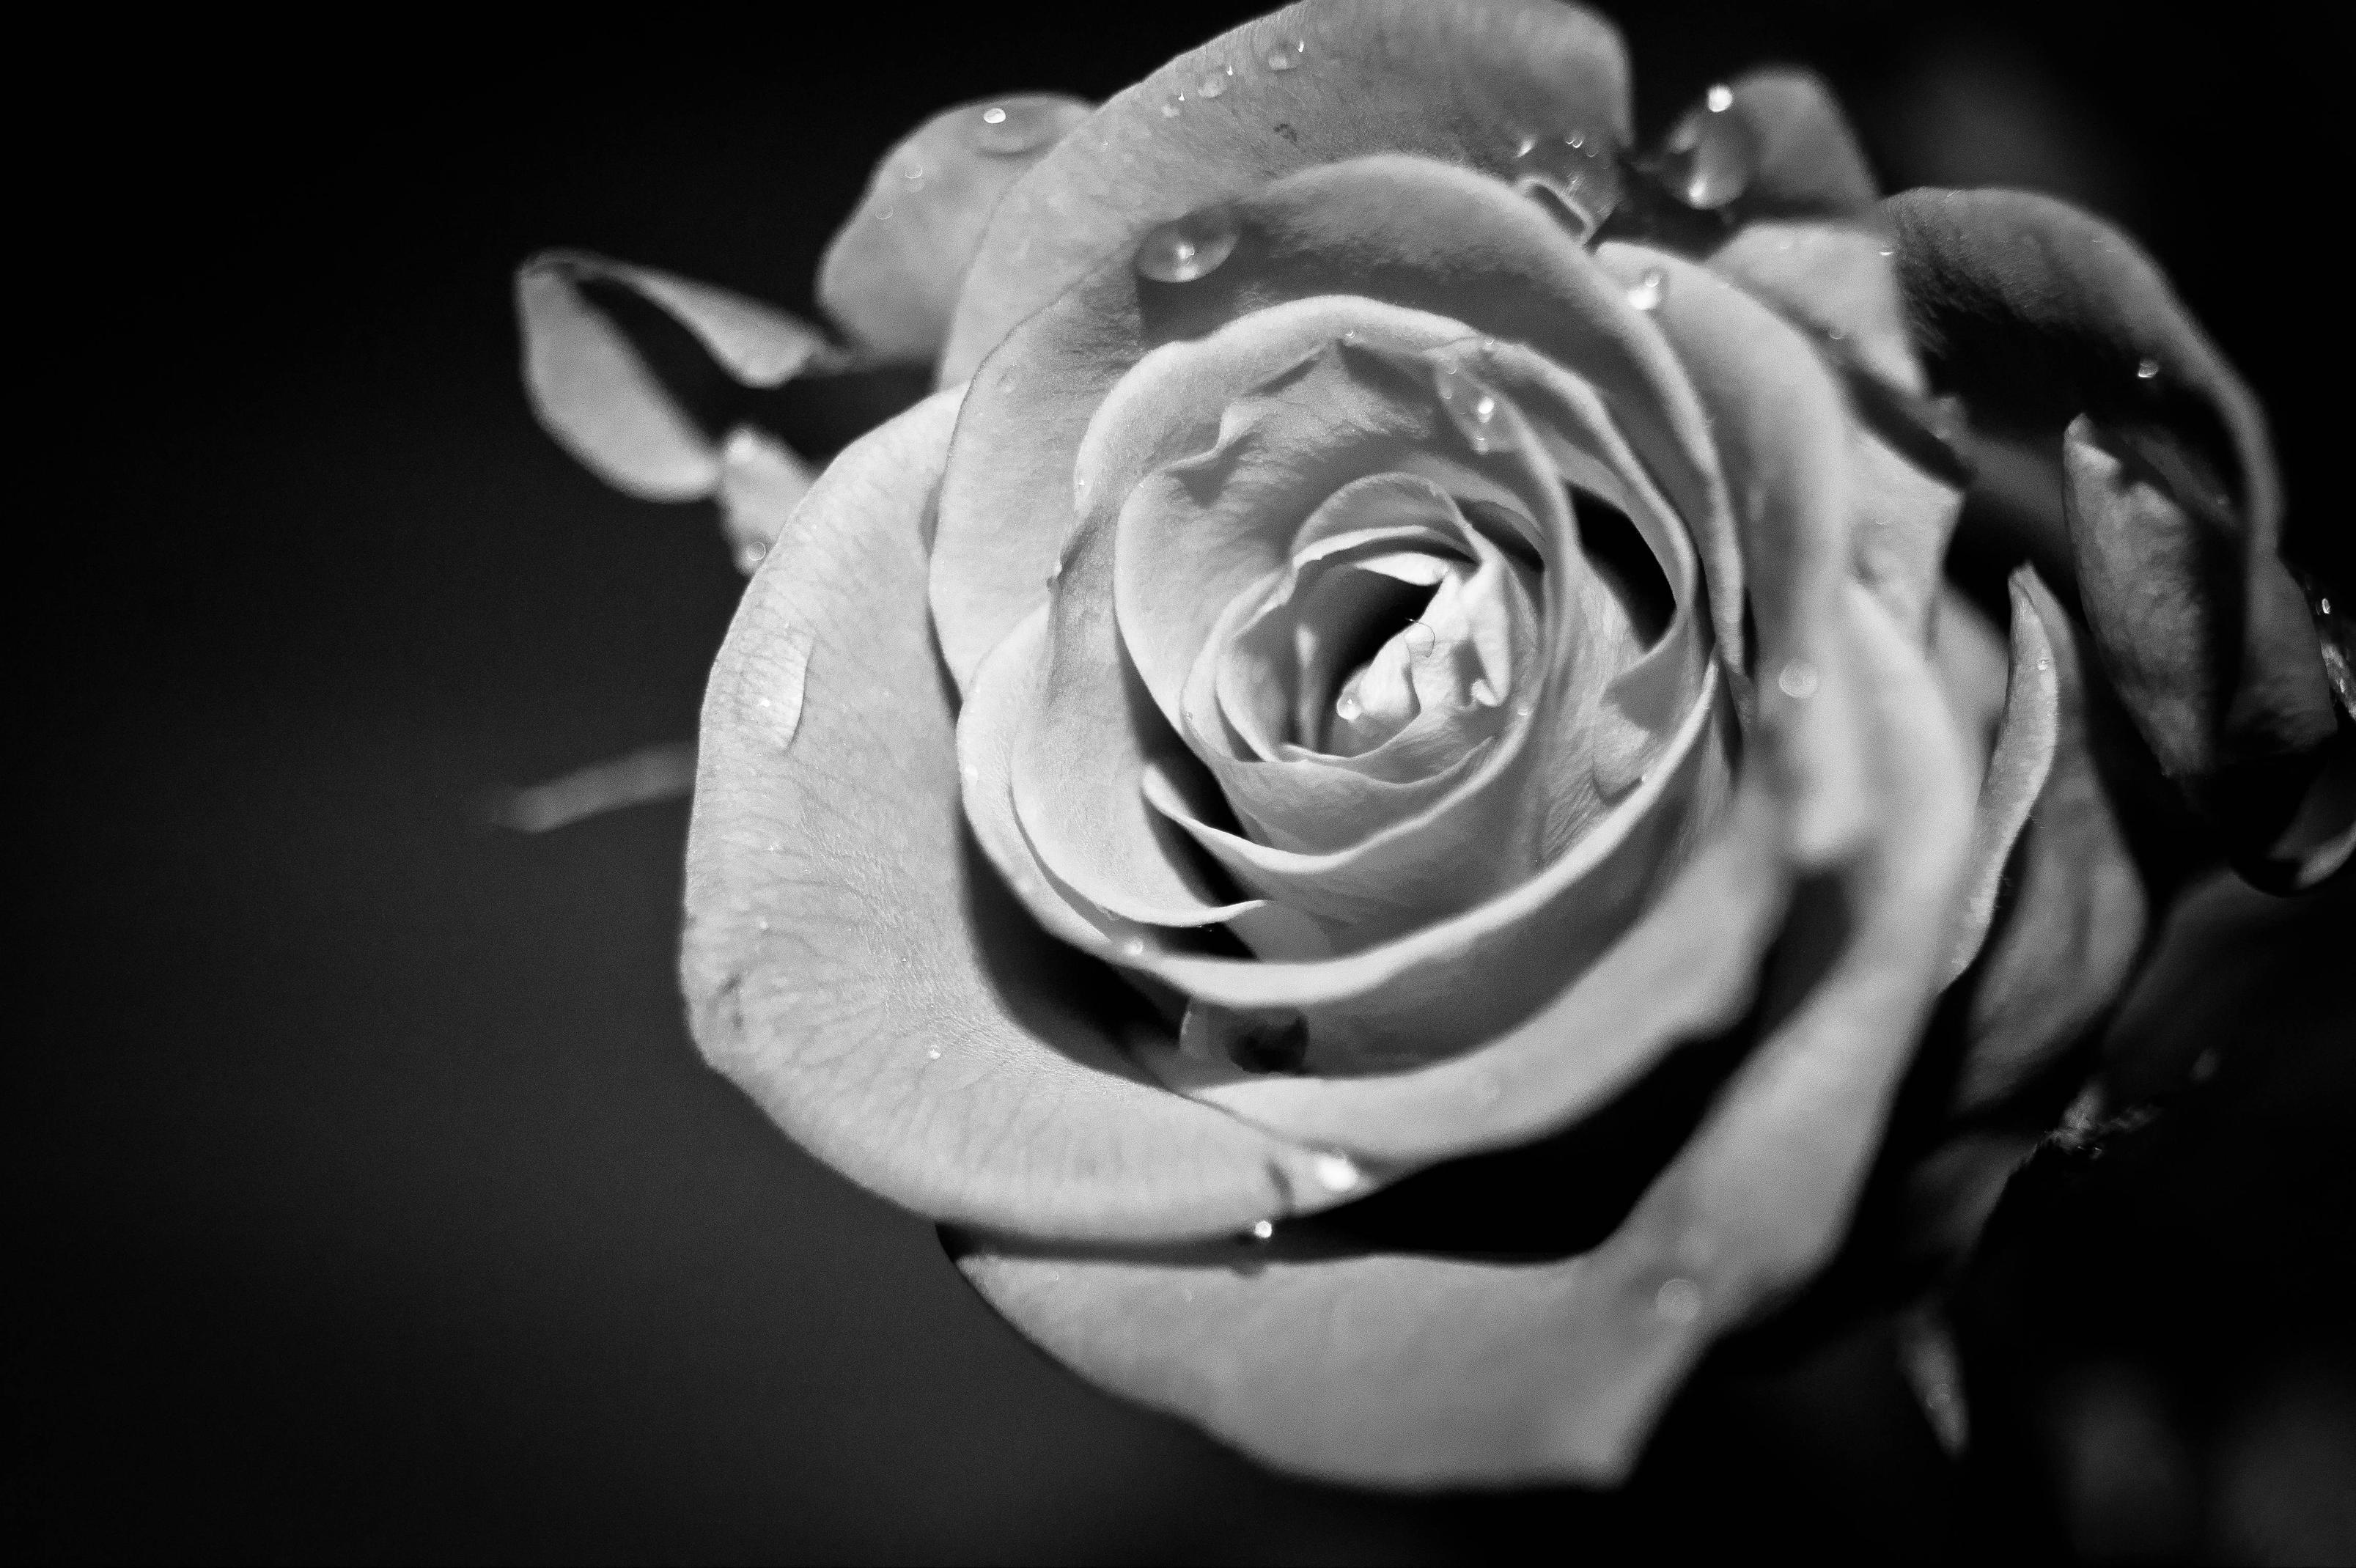 Black And White Aesthetic Roses Wallpapers - Wallpaper Cave 2E2